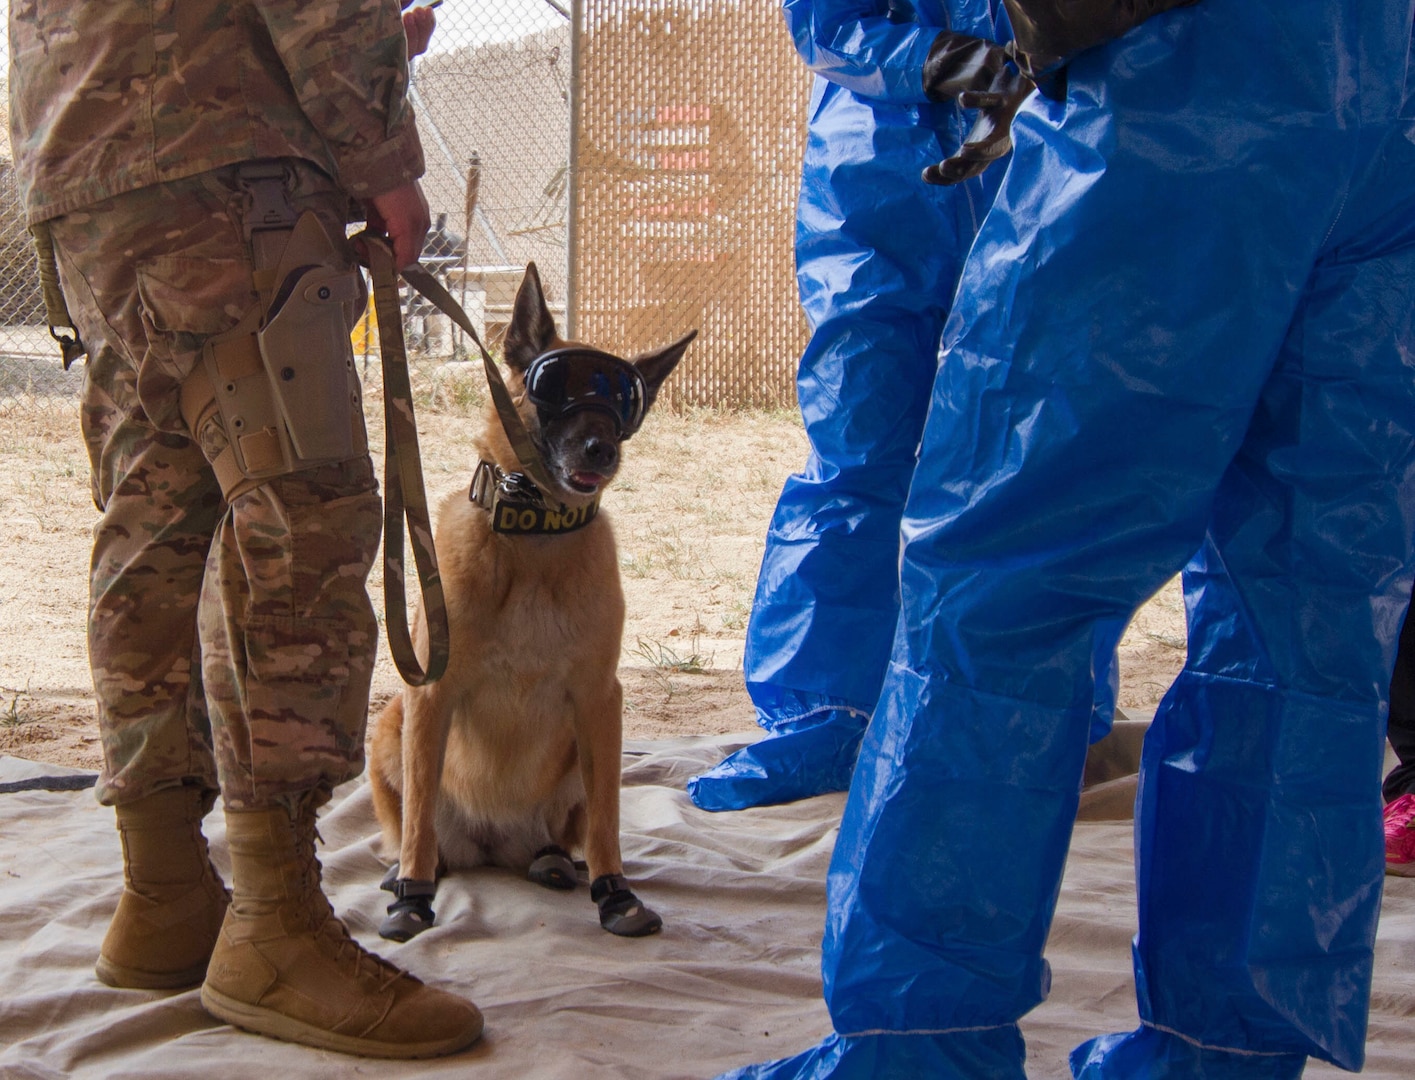 Military working dog, Oopey, a Belgian Malinois who does patrol work and explosive detection, wears protective gear and stands with his handler and members of the 637th Chemical Company in preparation to complete Chemical, Biological, Radiological, or Nuclear (CBRN) decontamination training in Kuwait April 11, 2019. This is the first time Oopey conducted CBRN decontamination training. Members of the 637th Chemical Company, the 719th Medical Detachment Veterinary Service Support, and the 386th Expeditionary Security Forces Squadron came together to conduct a live exercise to train to save the lives of military working dogs and their handlers in the event they were exposed to a CBRN substance. Live training events help prepare service members for real world events which may require them to recall the skills they learned in training to stay in the fight and survive.